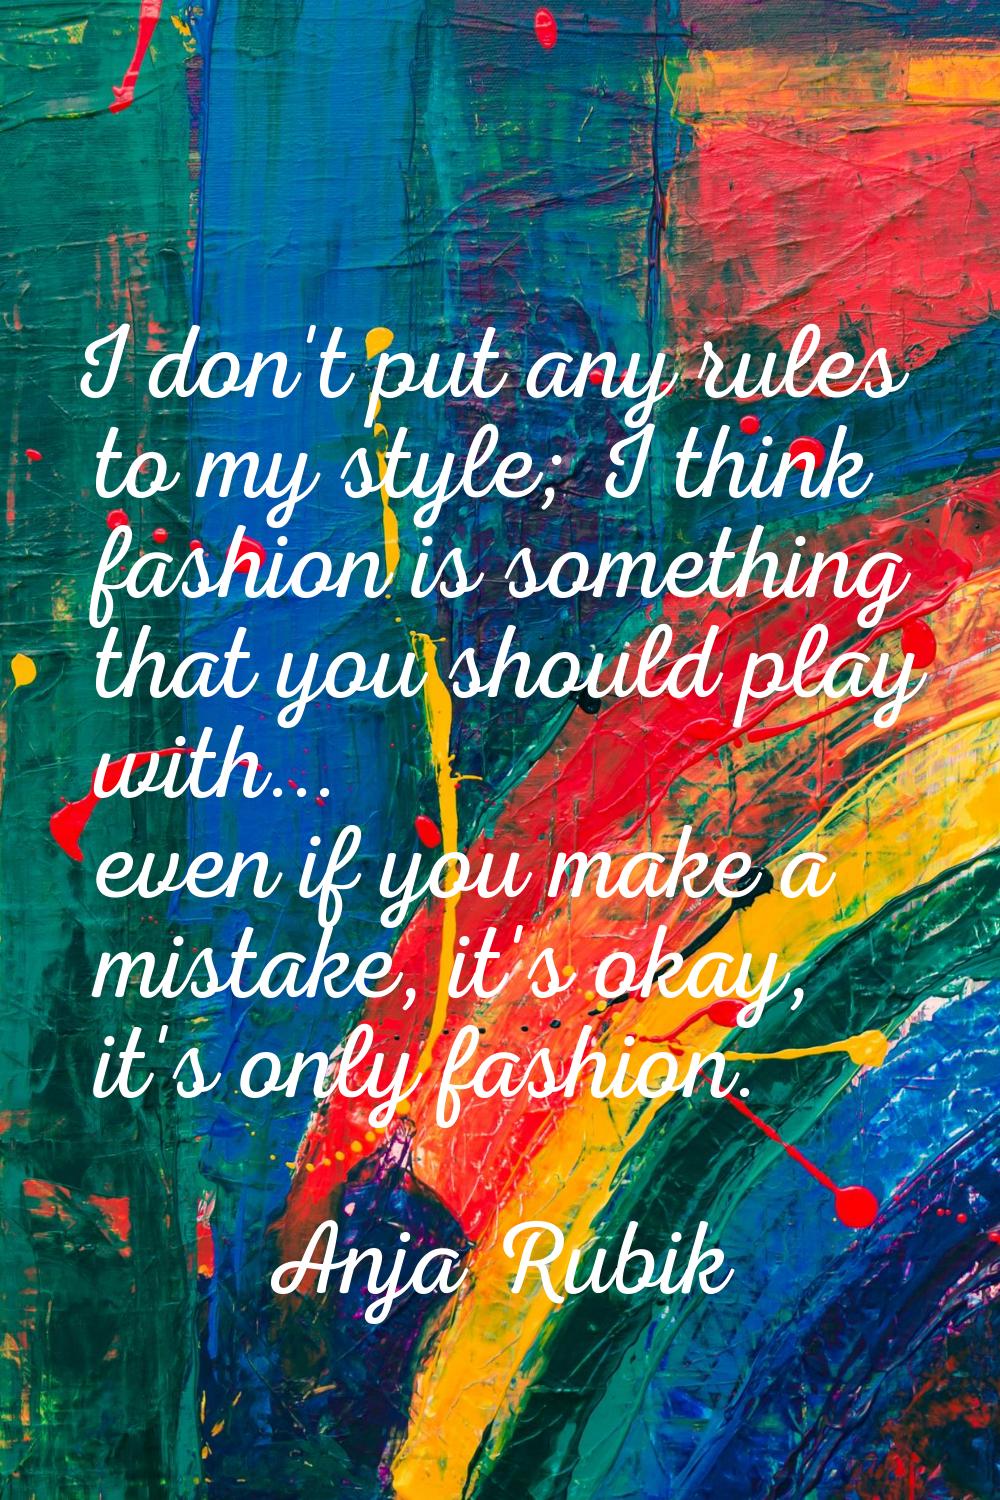 I don't put any rules to my style; I think fashion is something that you should play with... even i